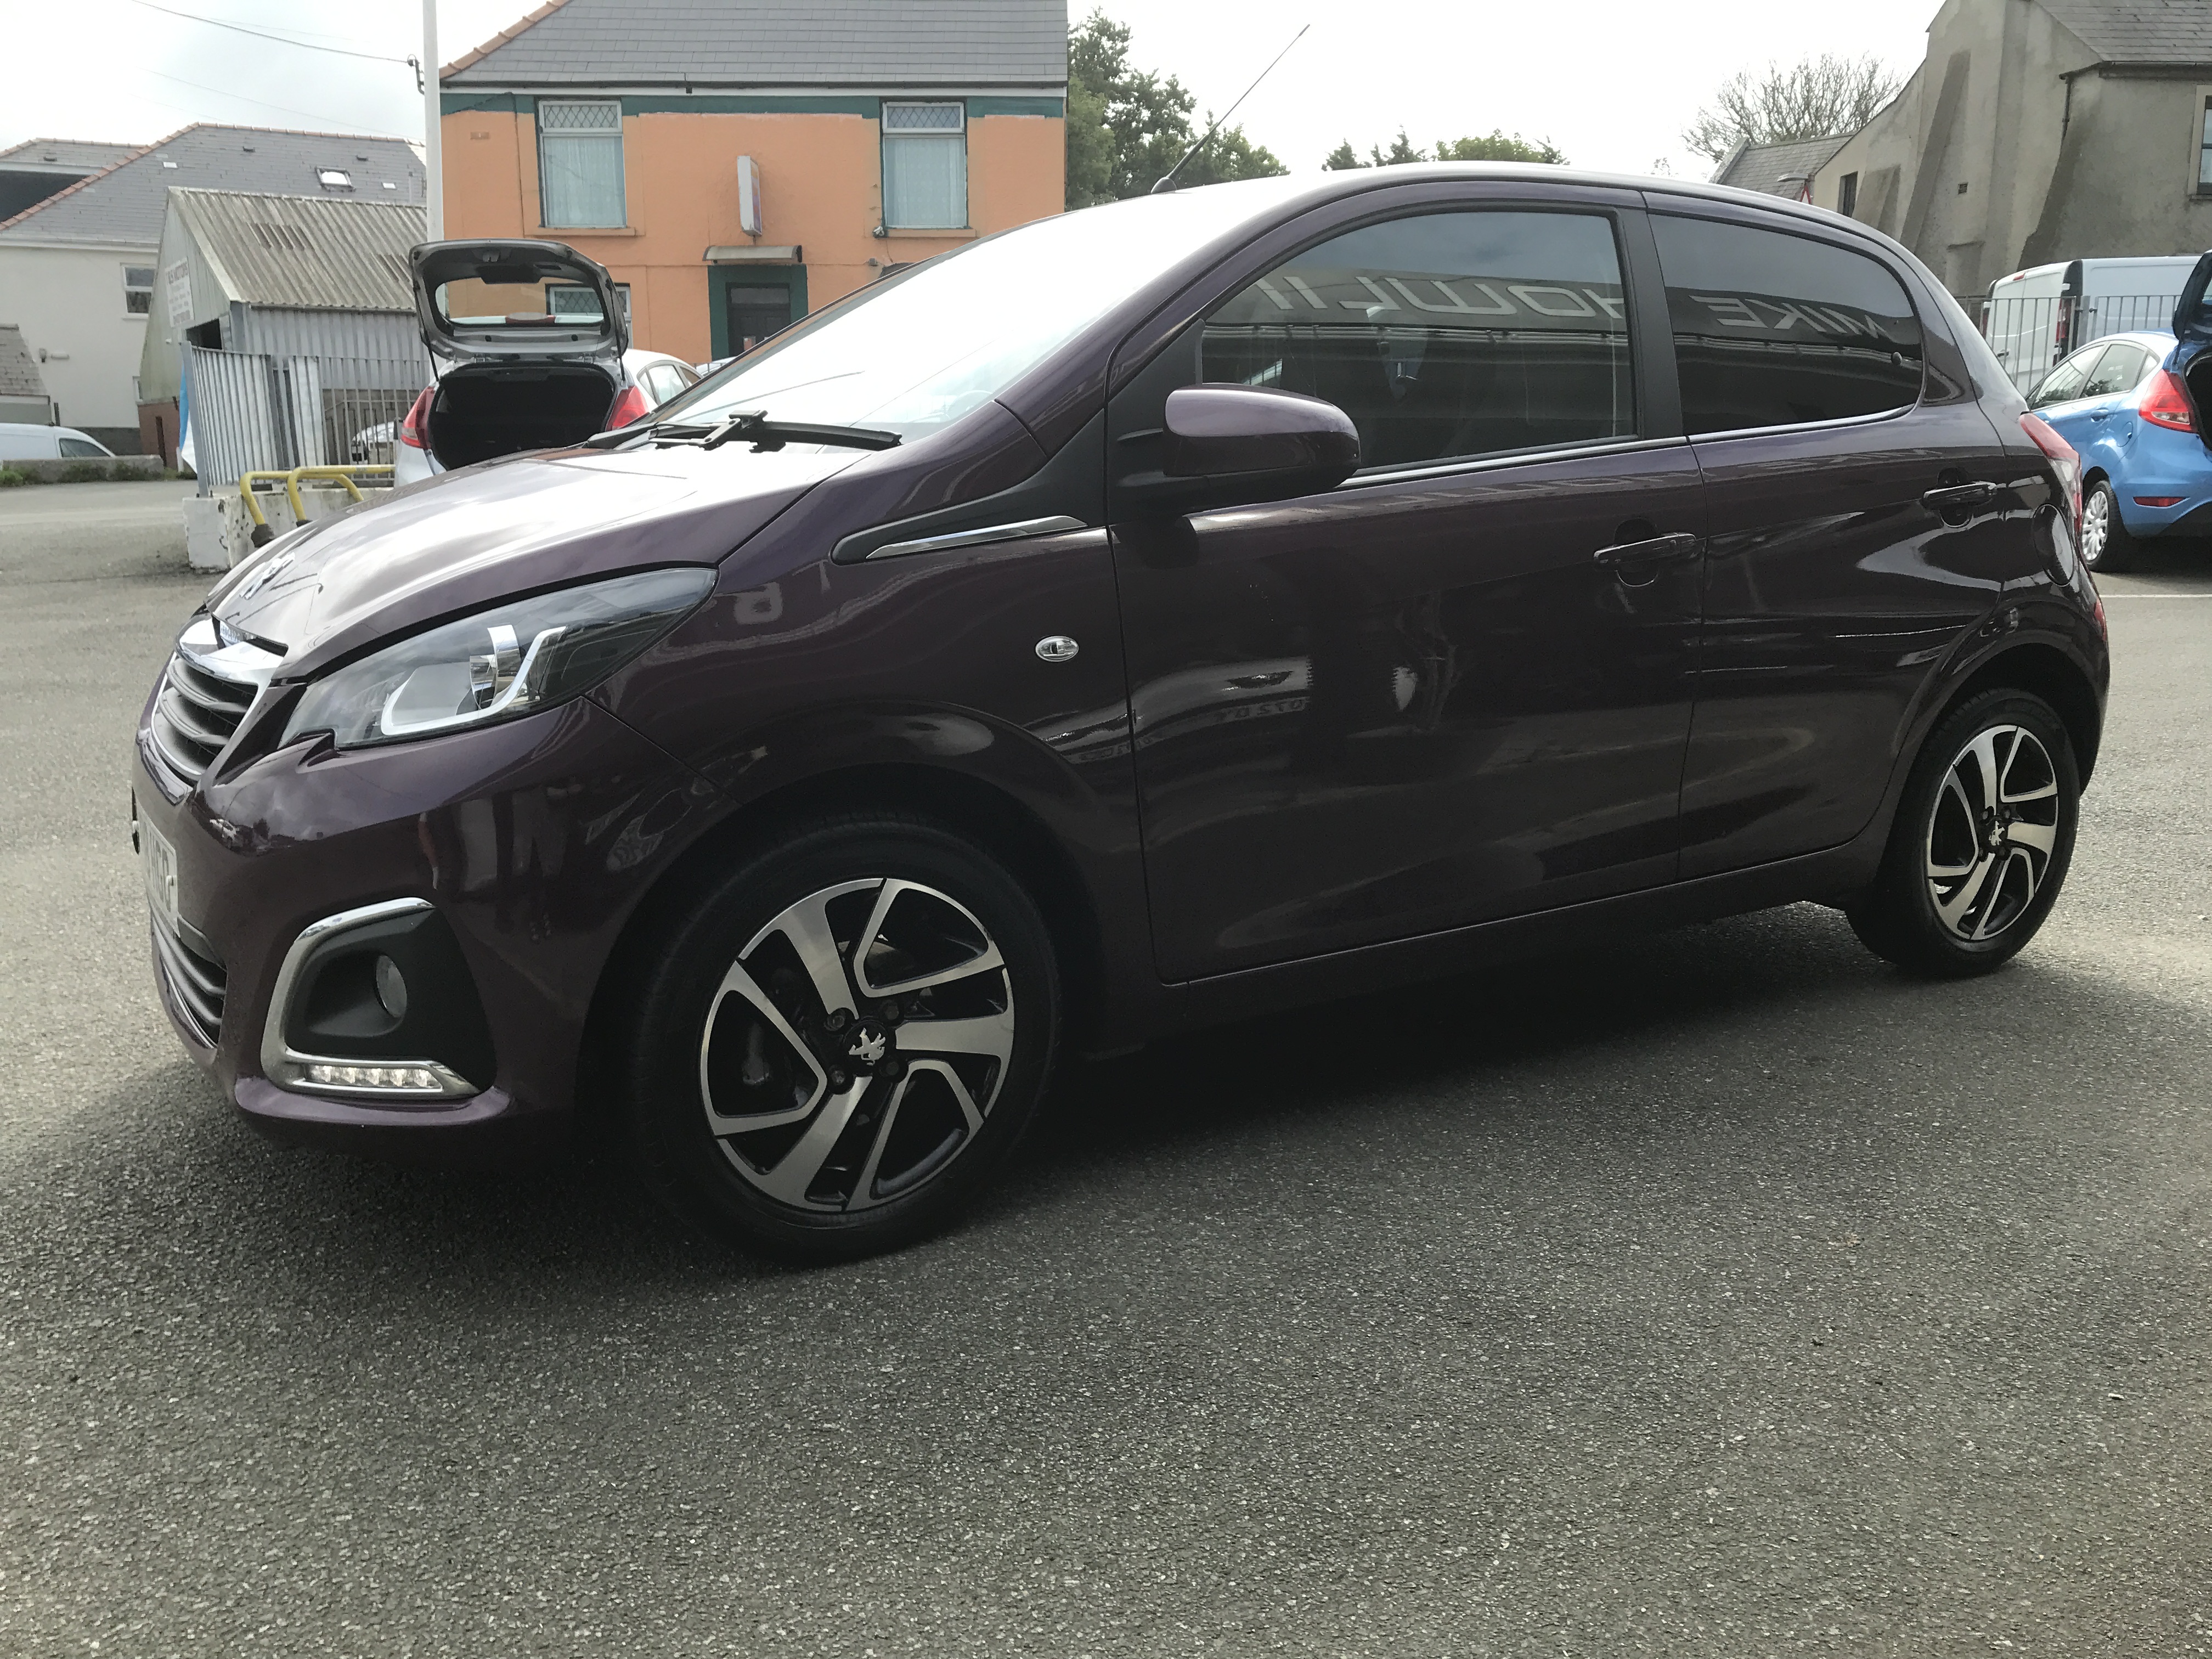 Peugeot 108 ALLURE for sale at Mike Howlin Motor Sales Pembrokeshire